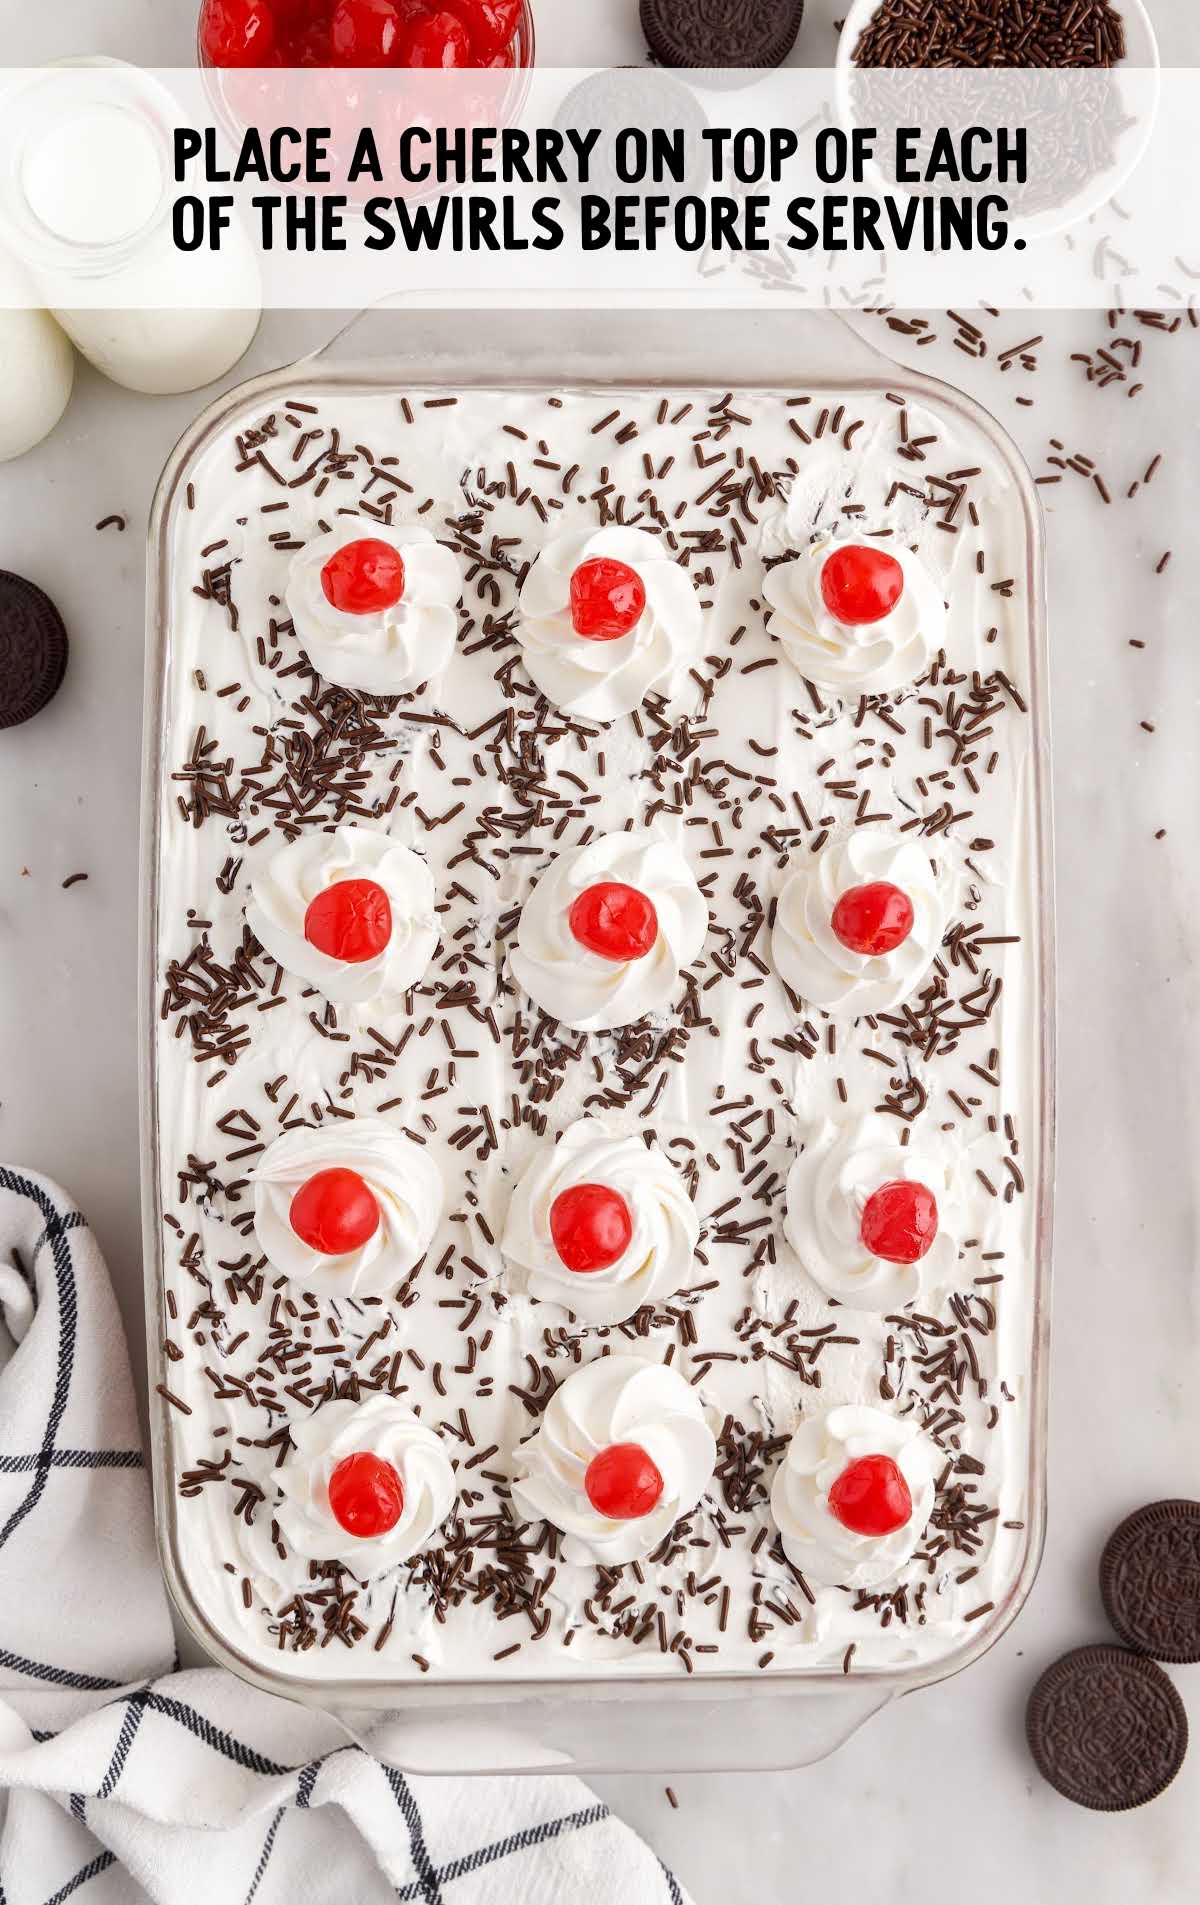 cherries placed on top of each of the swirl in a baking dish